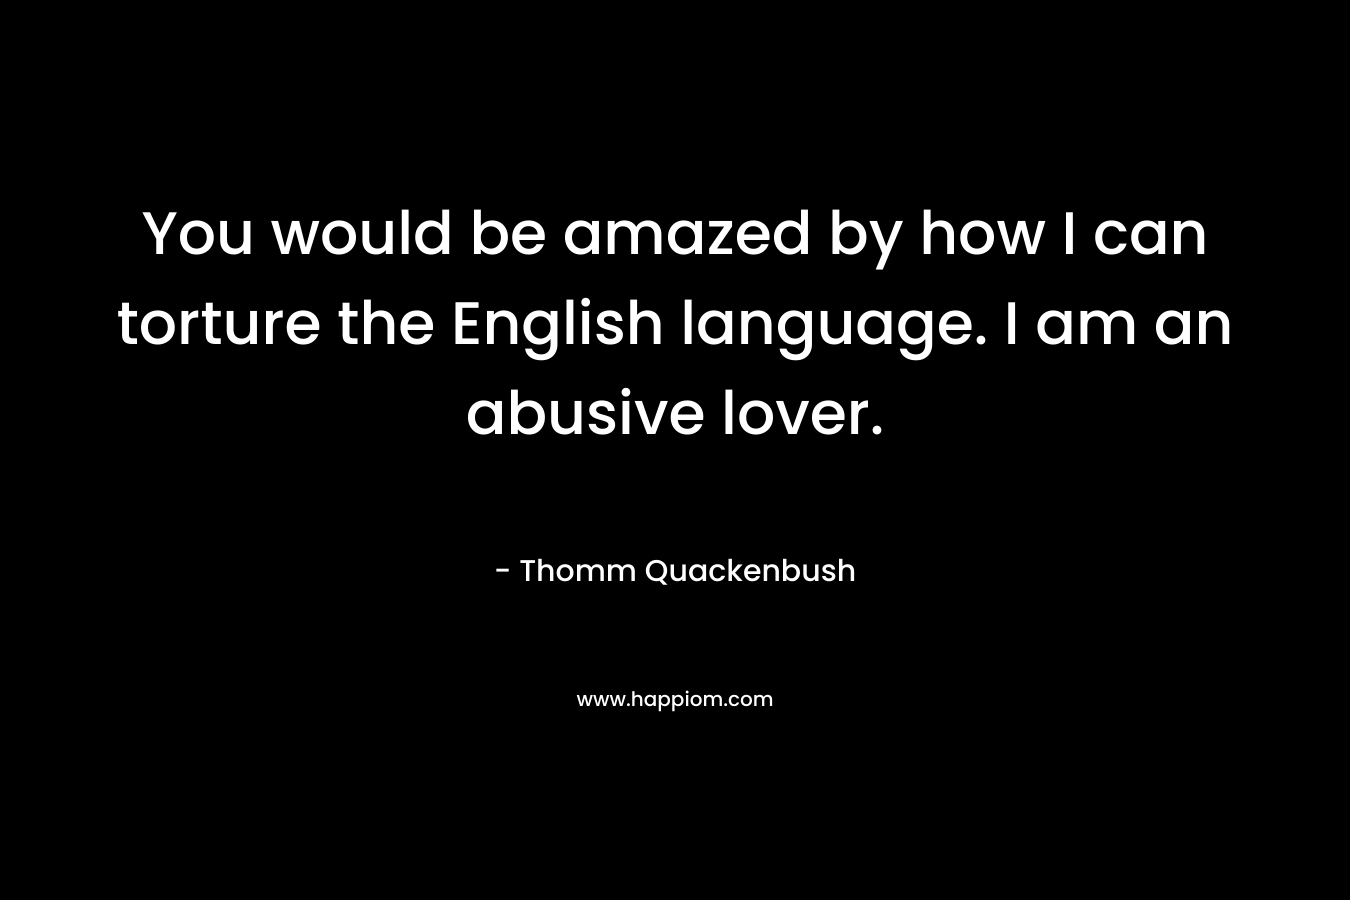 You would be amazed by how I can torture the English language. I am an abusive lover. – Thomm Quackenbush